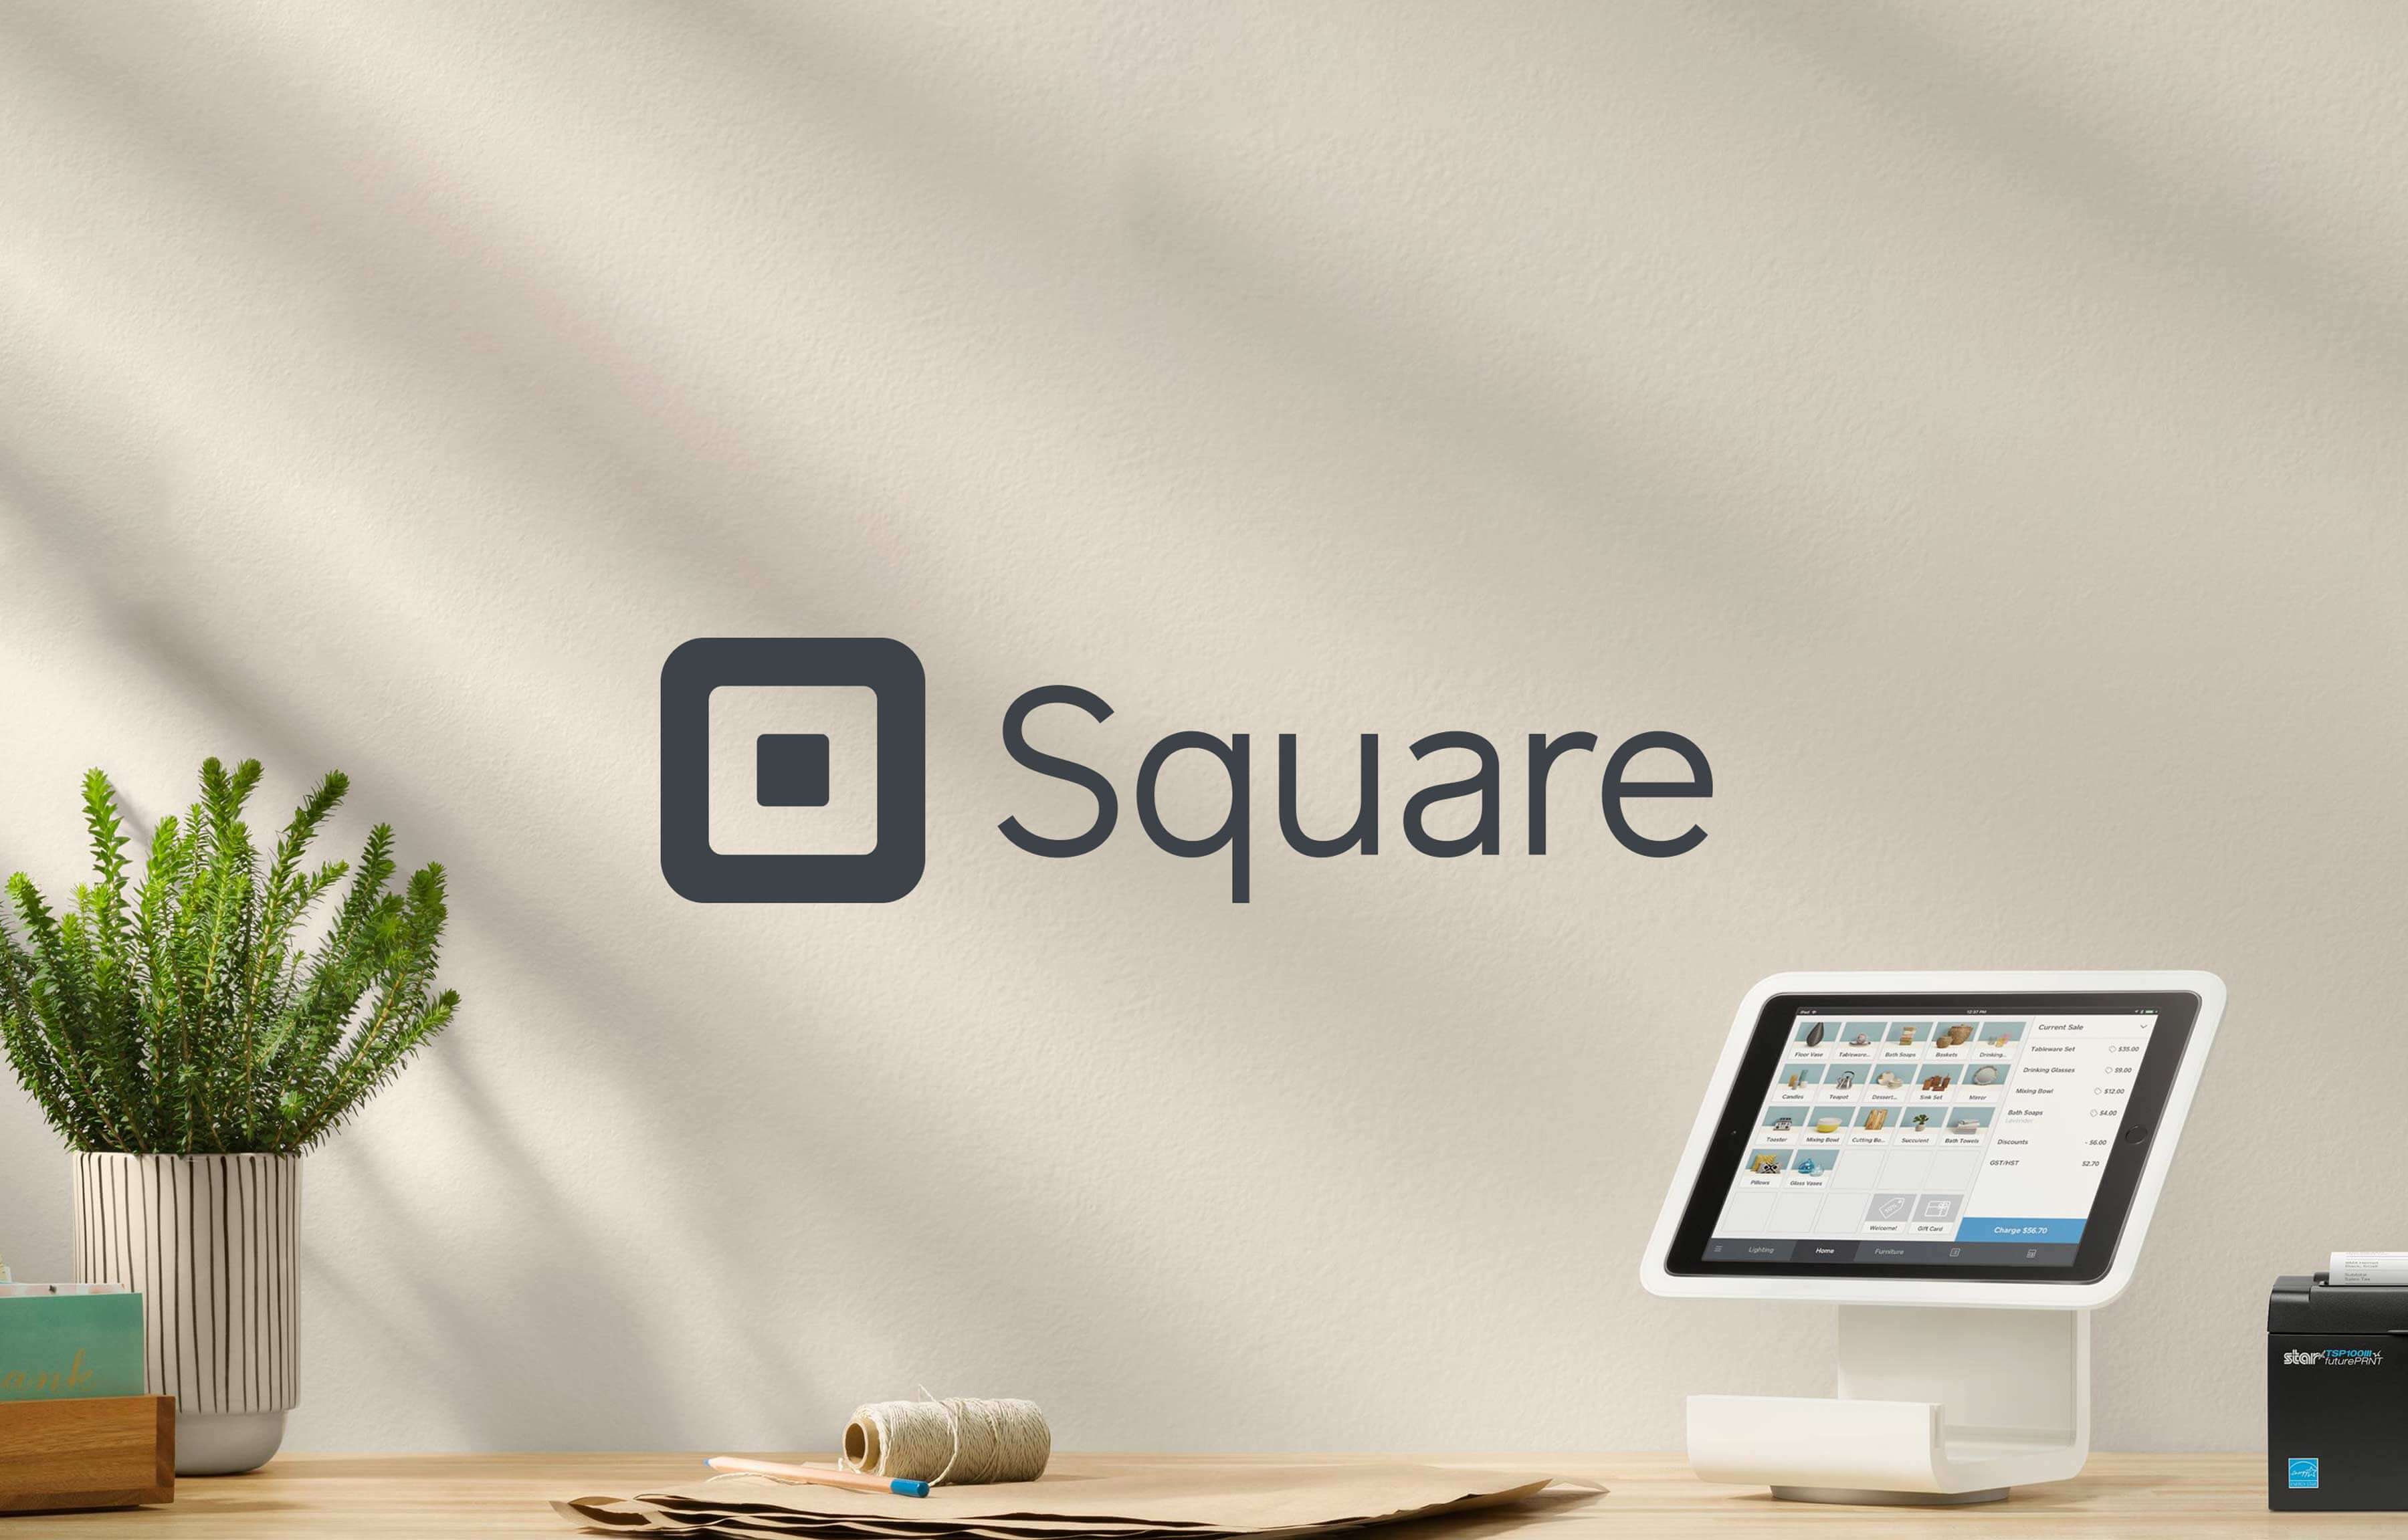 Square Buys Australian Company “Afterpay” for $29 billion